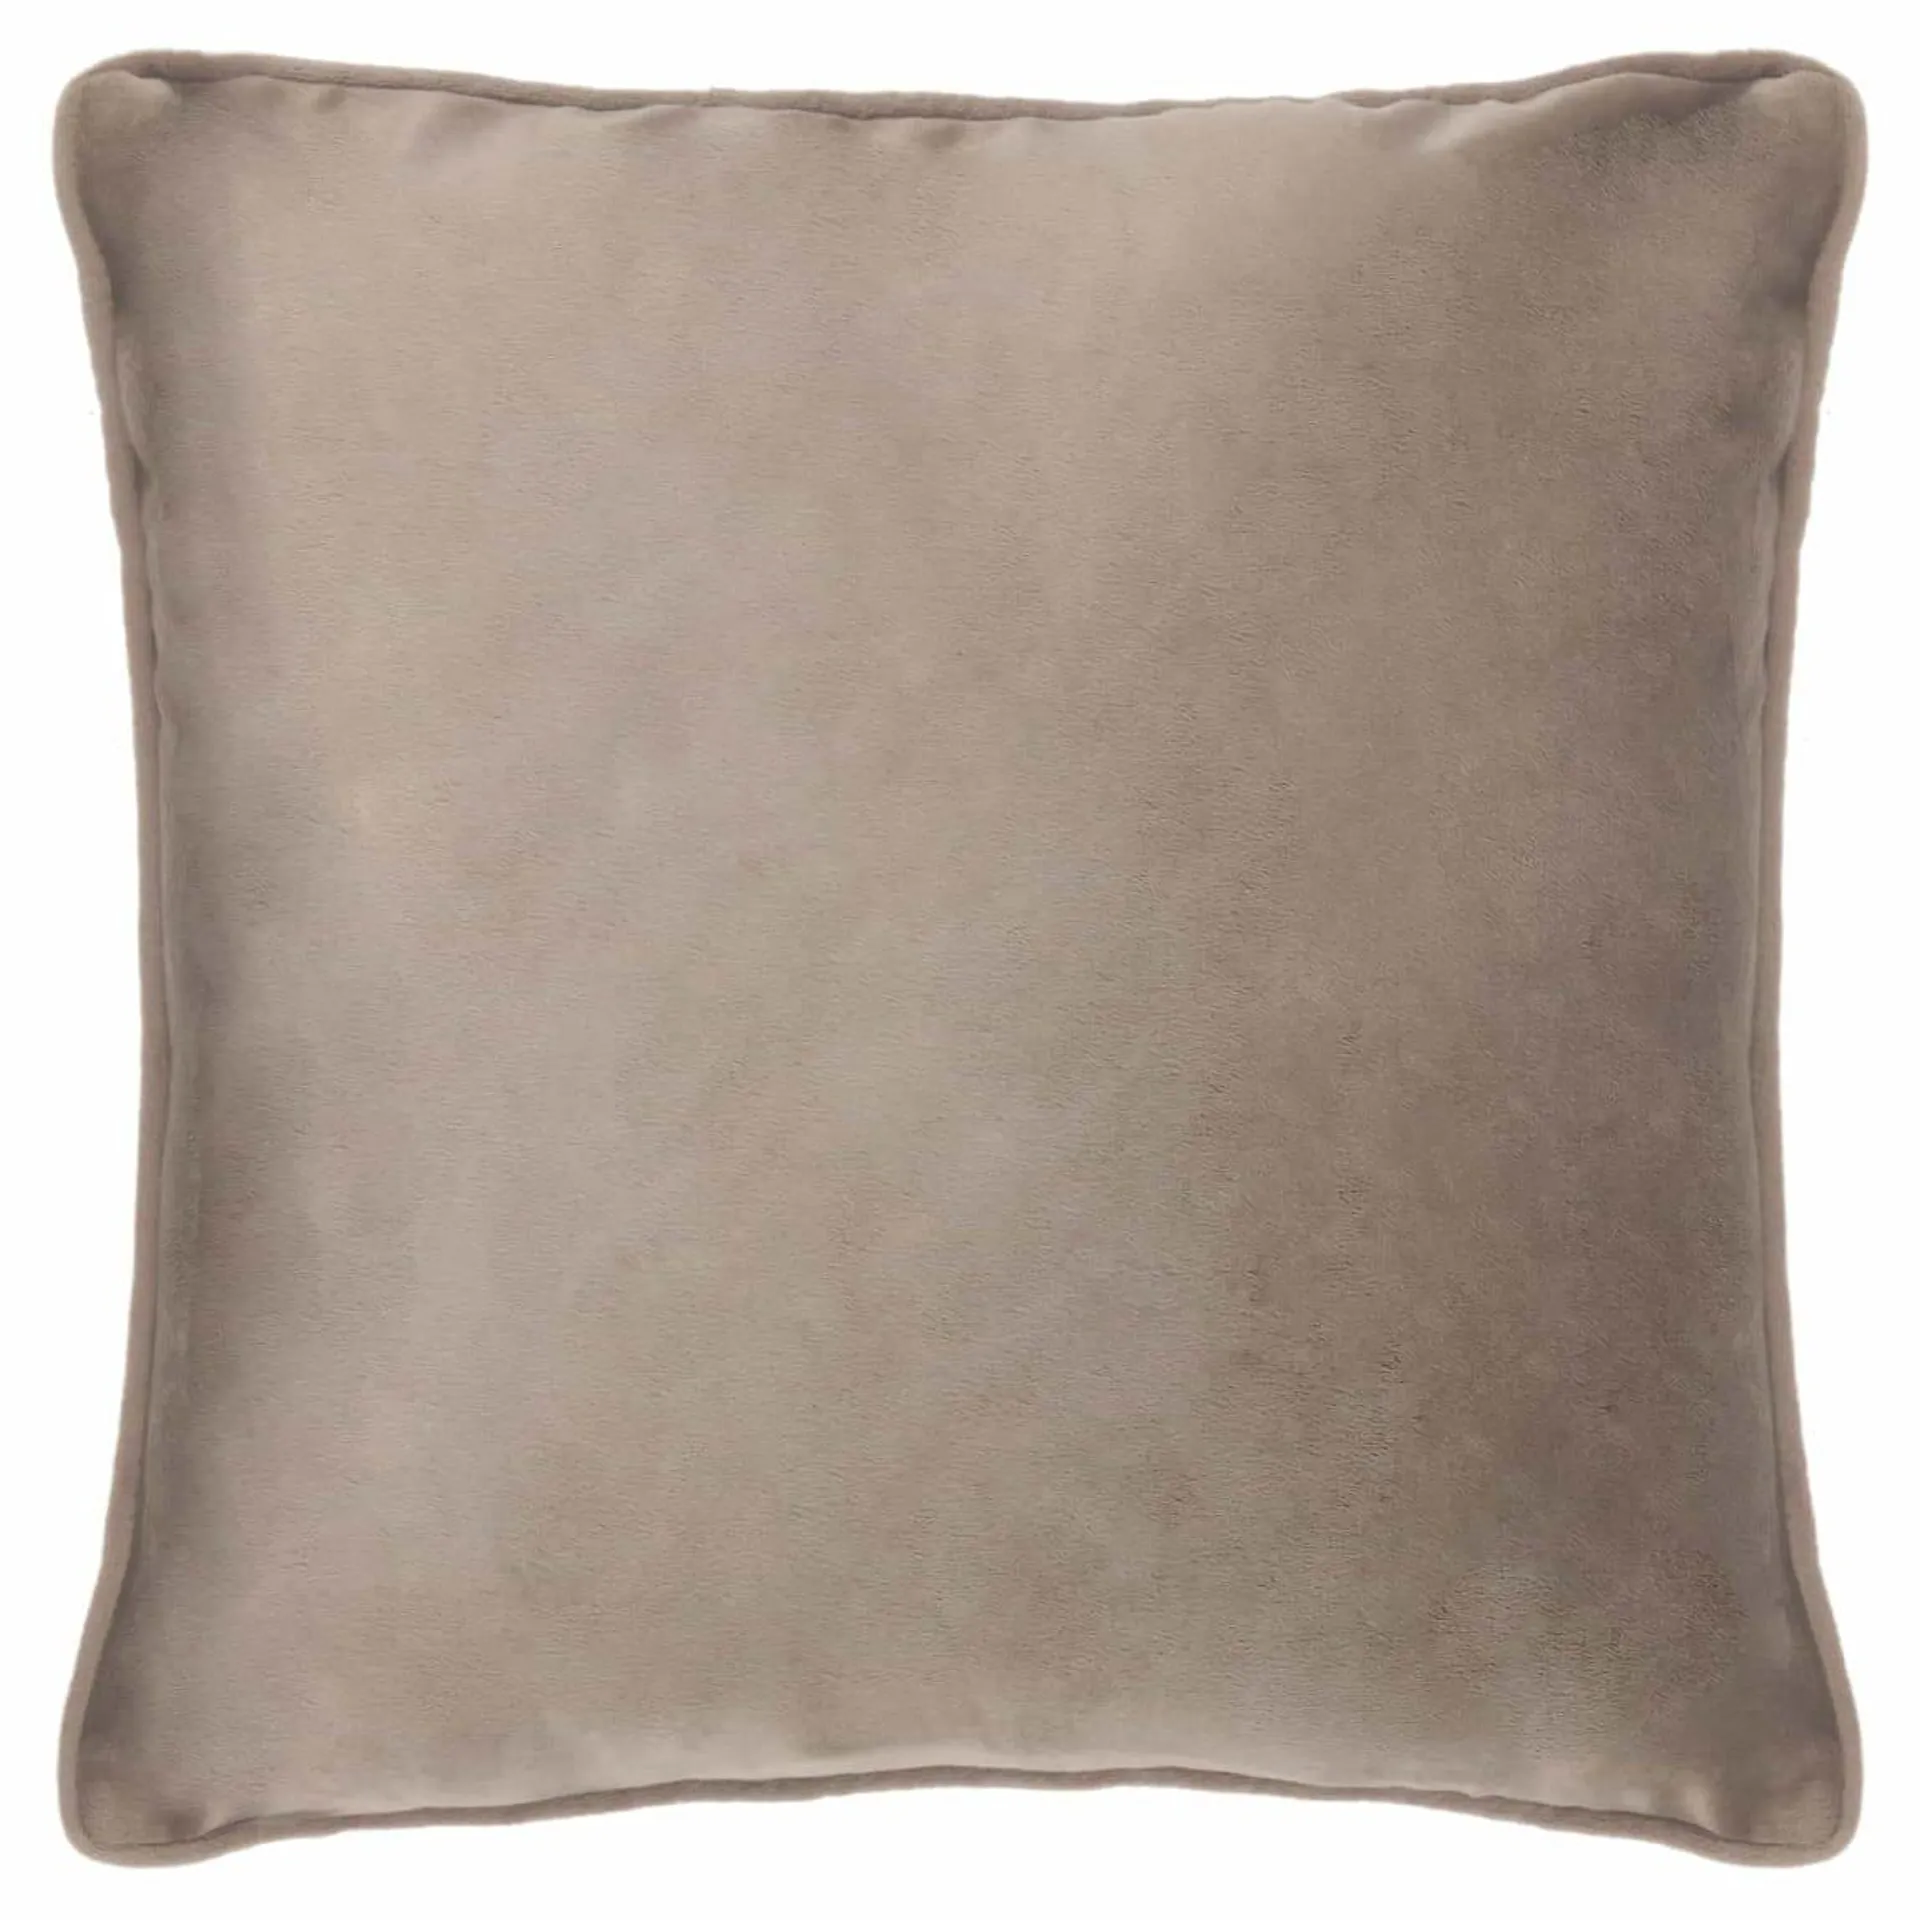 Simply Everyday Reversible Cushion - Cream / Oatmeal